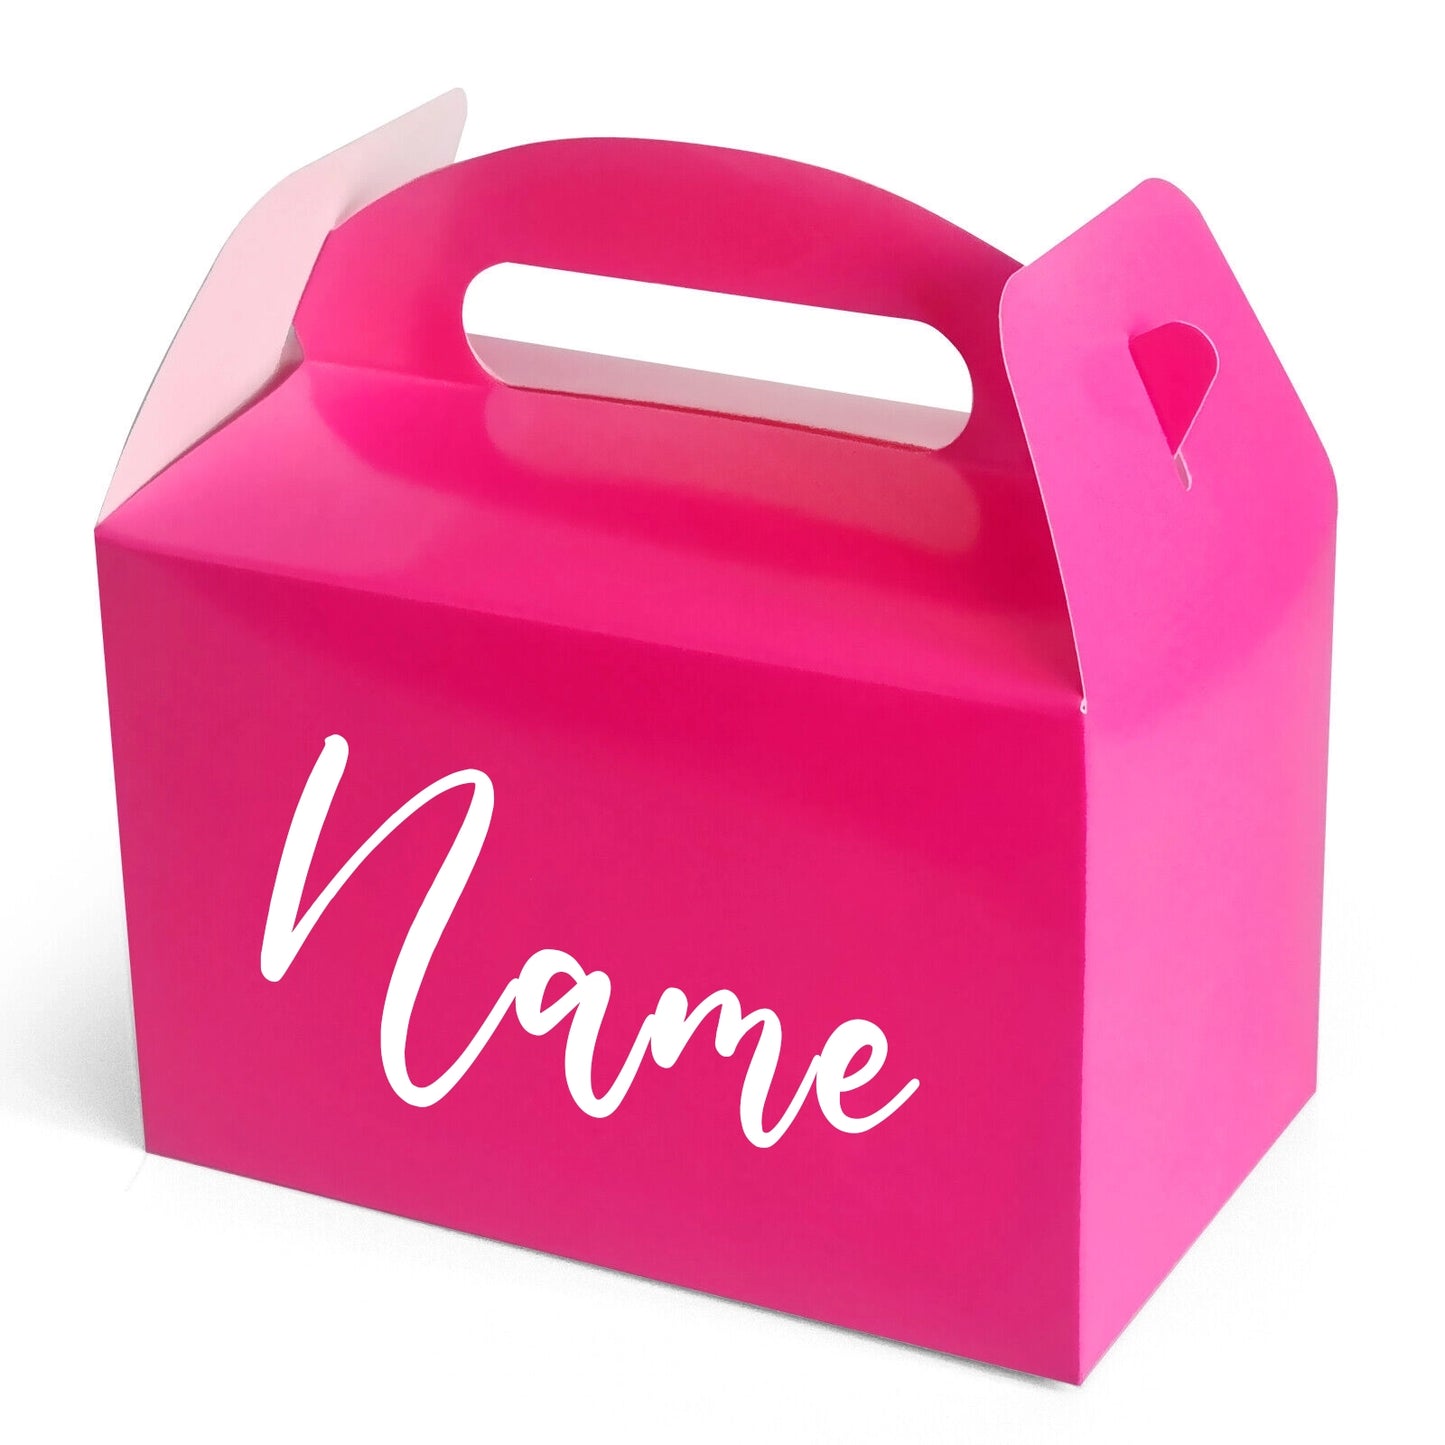 Personalised Party Boxes Gift Loot Box Any Name - Hot Pink Boxes